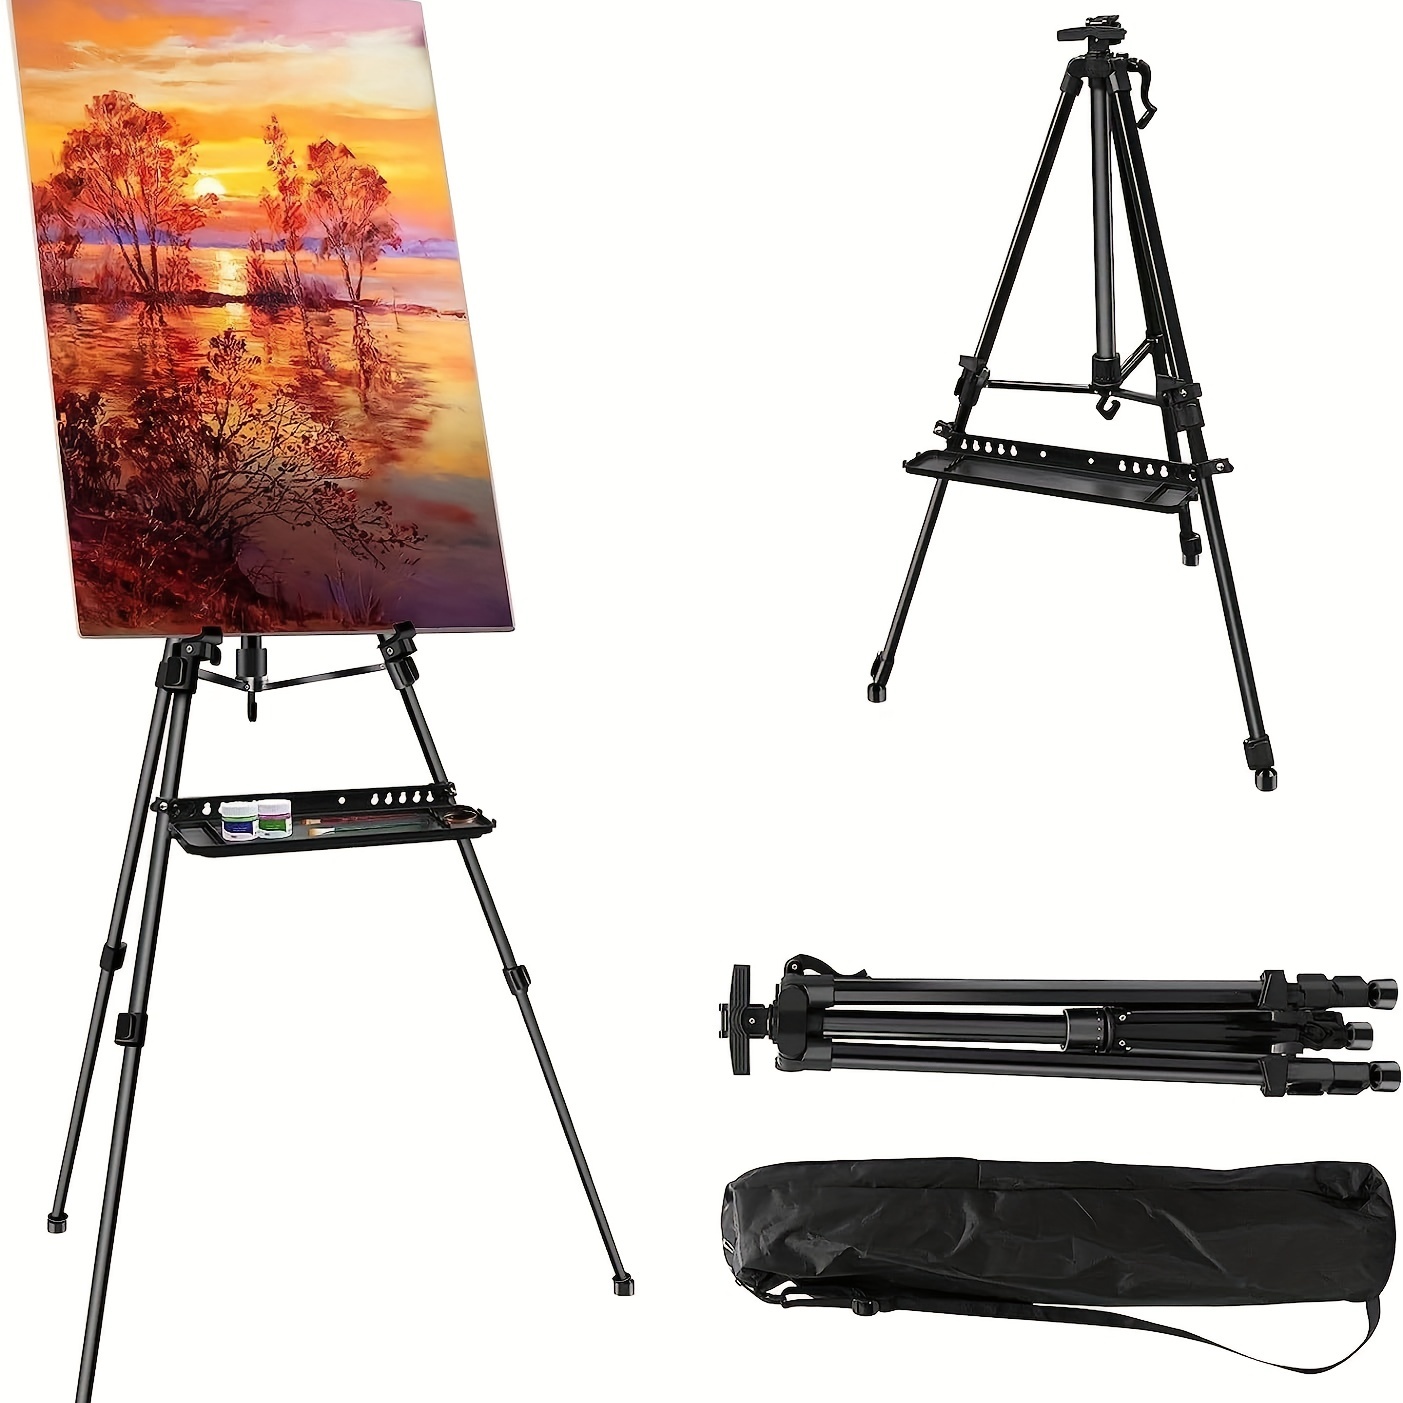 5 Mini Wood Display Easel (12 Pack), A-Frame Artist Tripod Easel - Tabletop  Holder Stand, 5” - 12 Pack - King Soopers